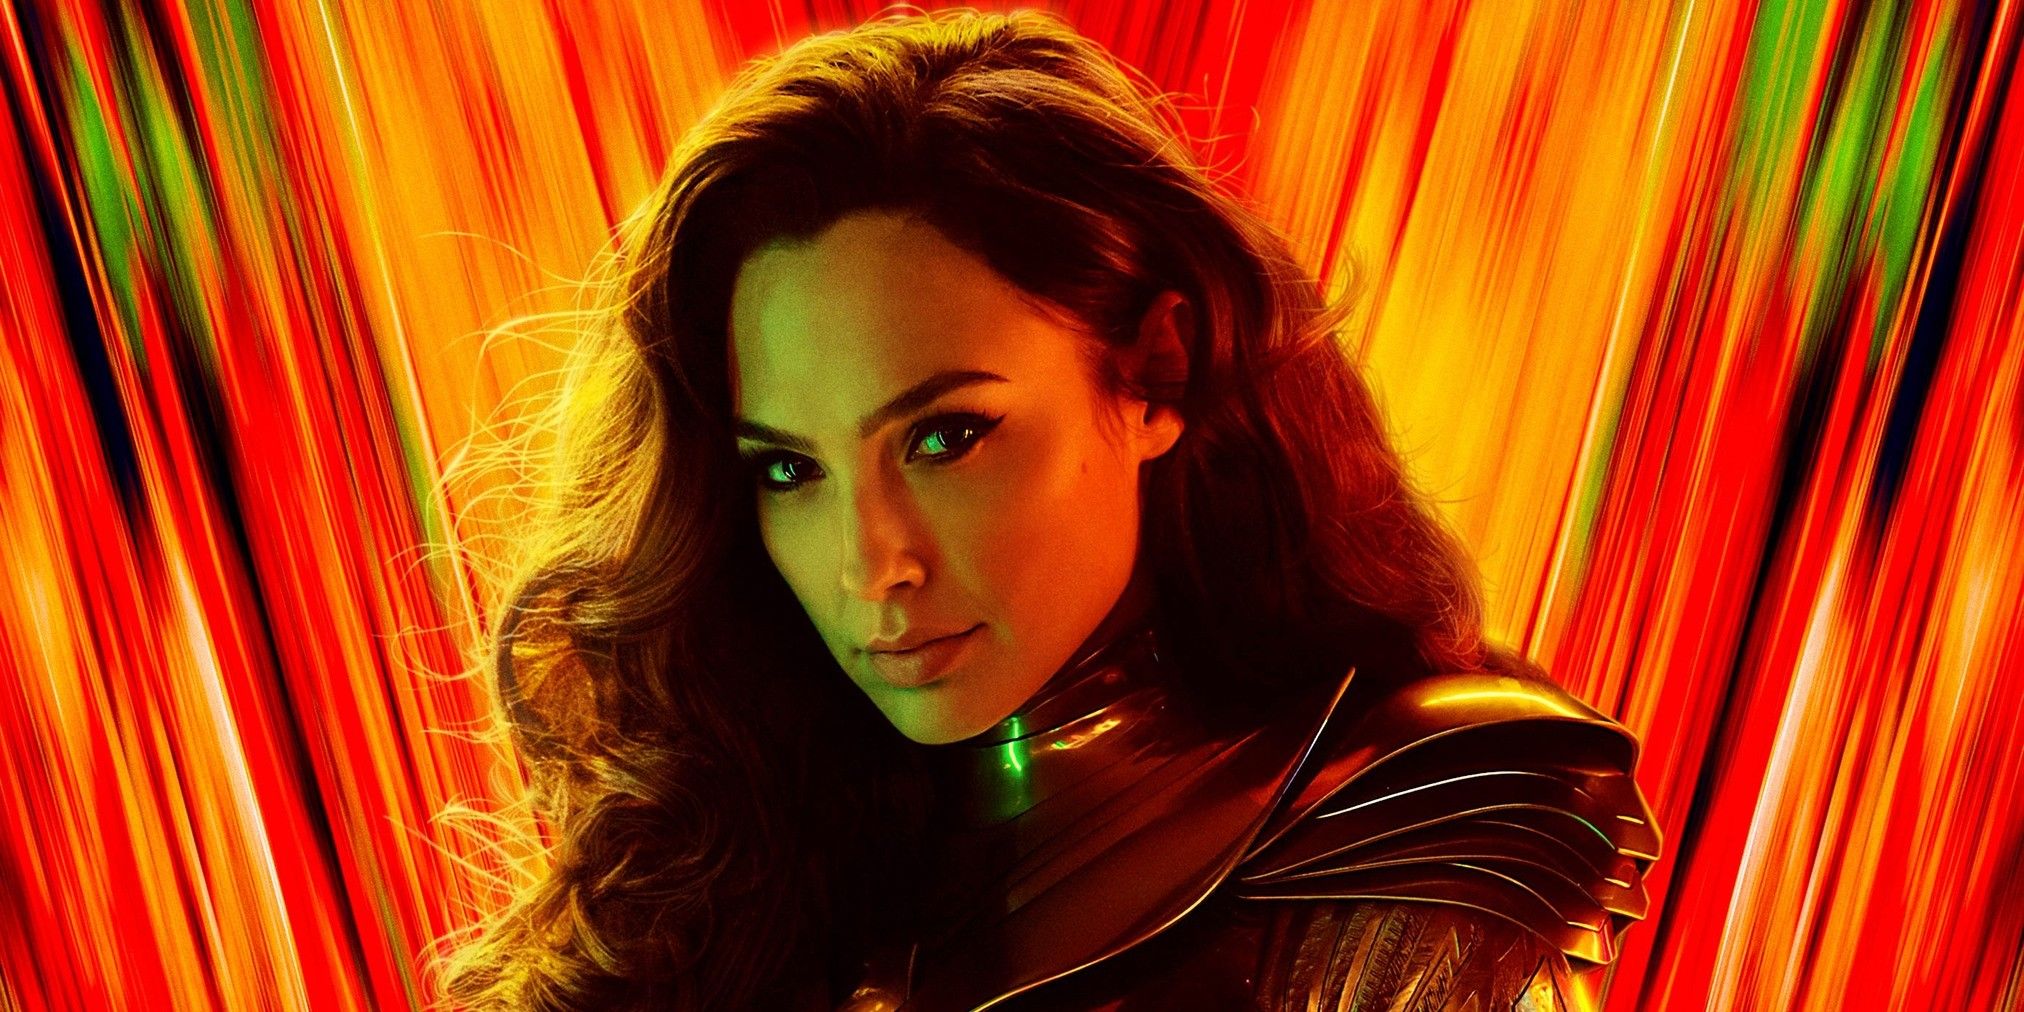 Wonder Woman 2 & Tenet Are NOT Going To Streaming Confirms Warner Bros